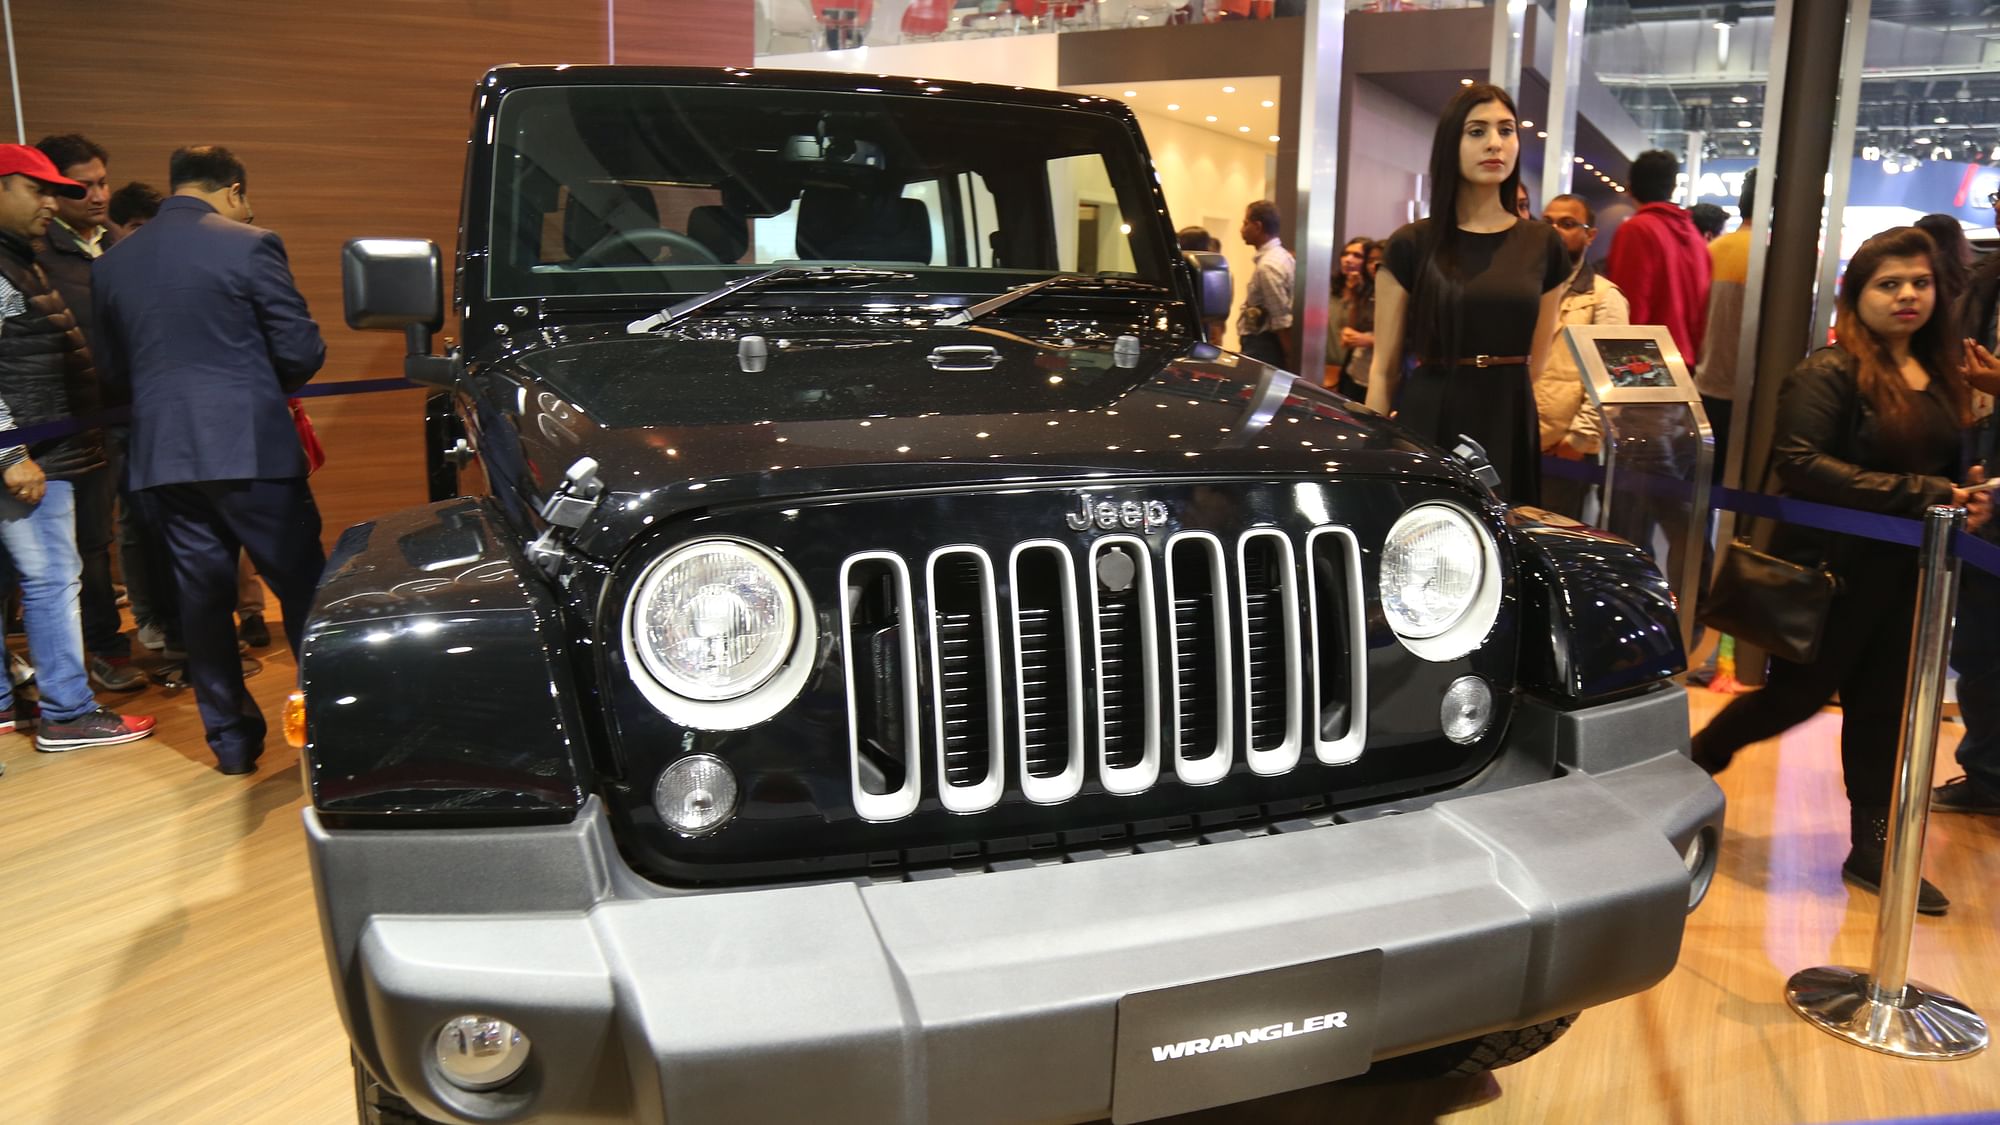 Jeep makes it’s India debut with the Wrangler Unlimited as one of the SUVs in its stable. (Photo: <b>The Quint</b>)